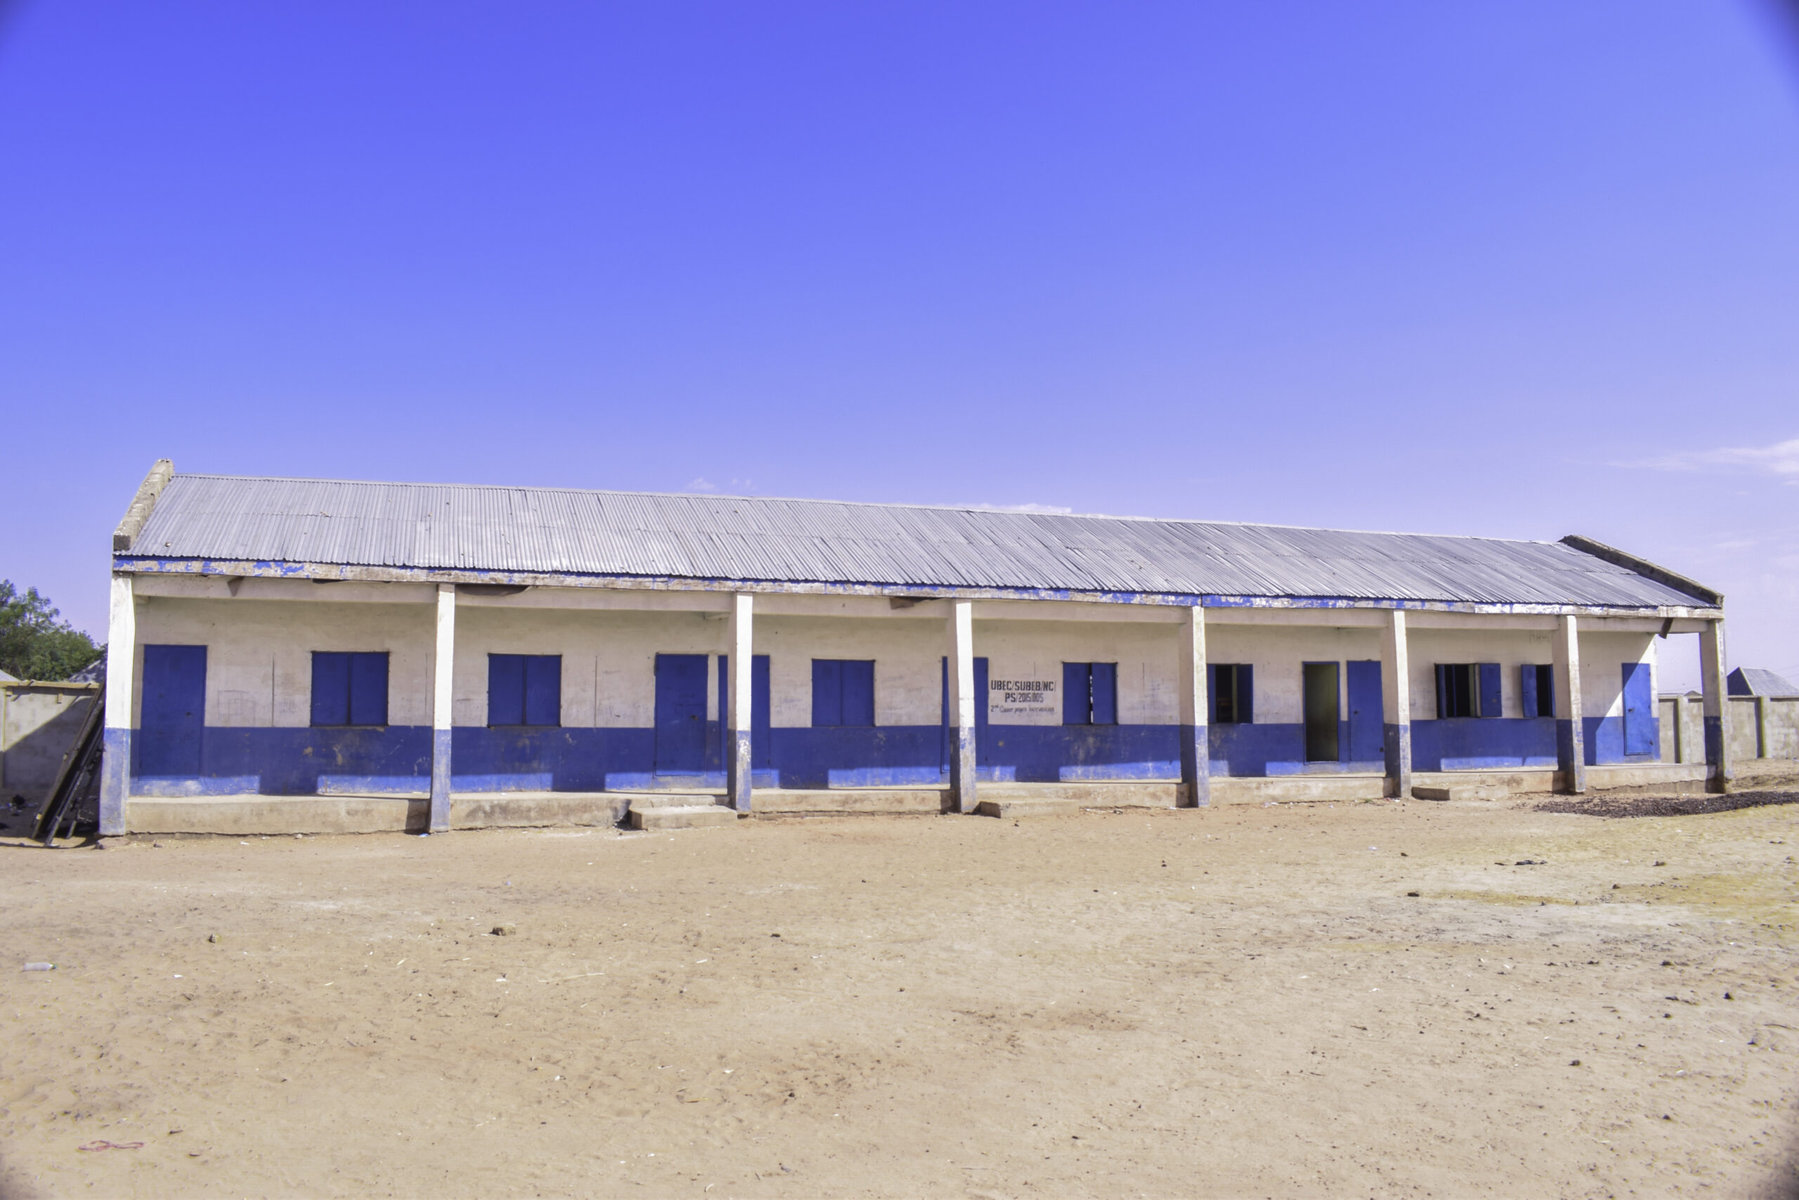 The school land in Kurfi village, Sokoto, that has been saved thanks to the radio show.